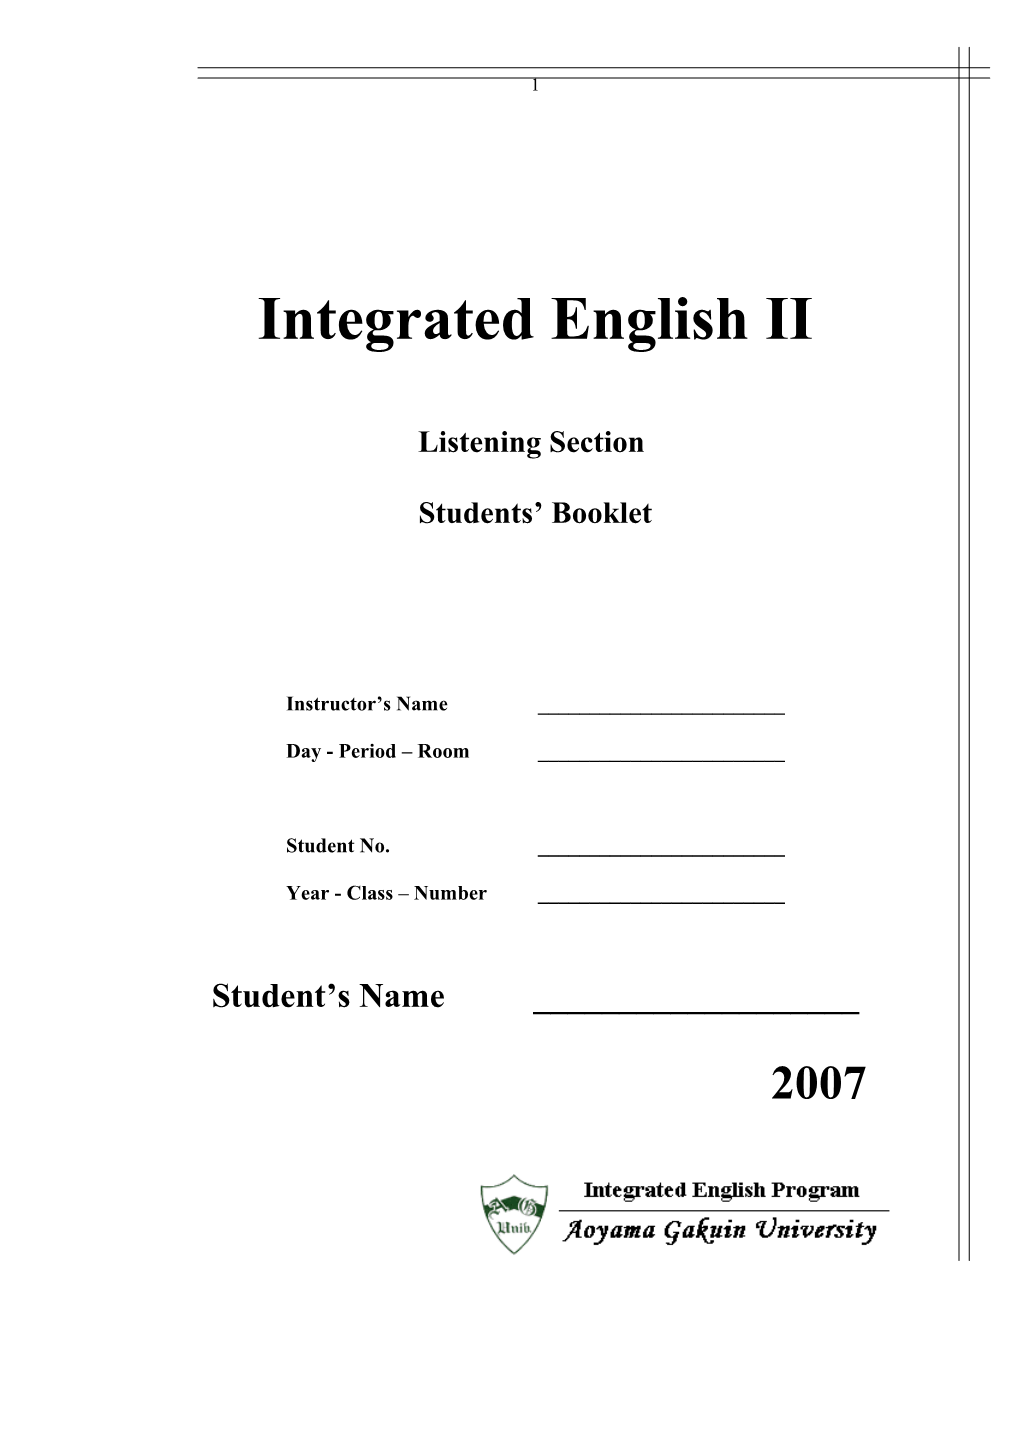 Integrated English I, Listening Section